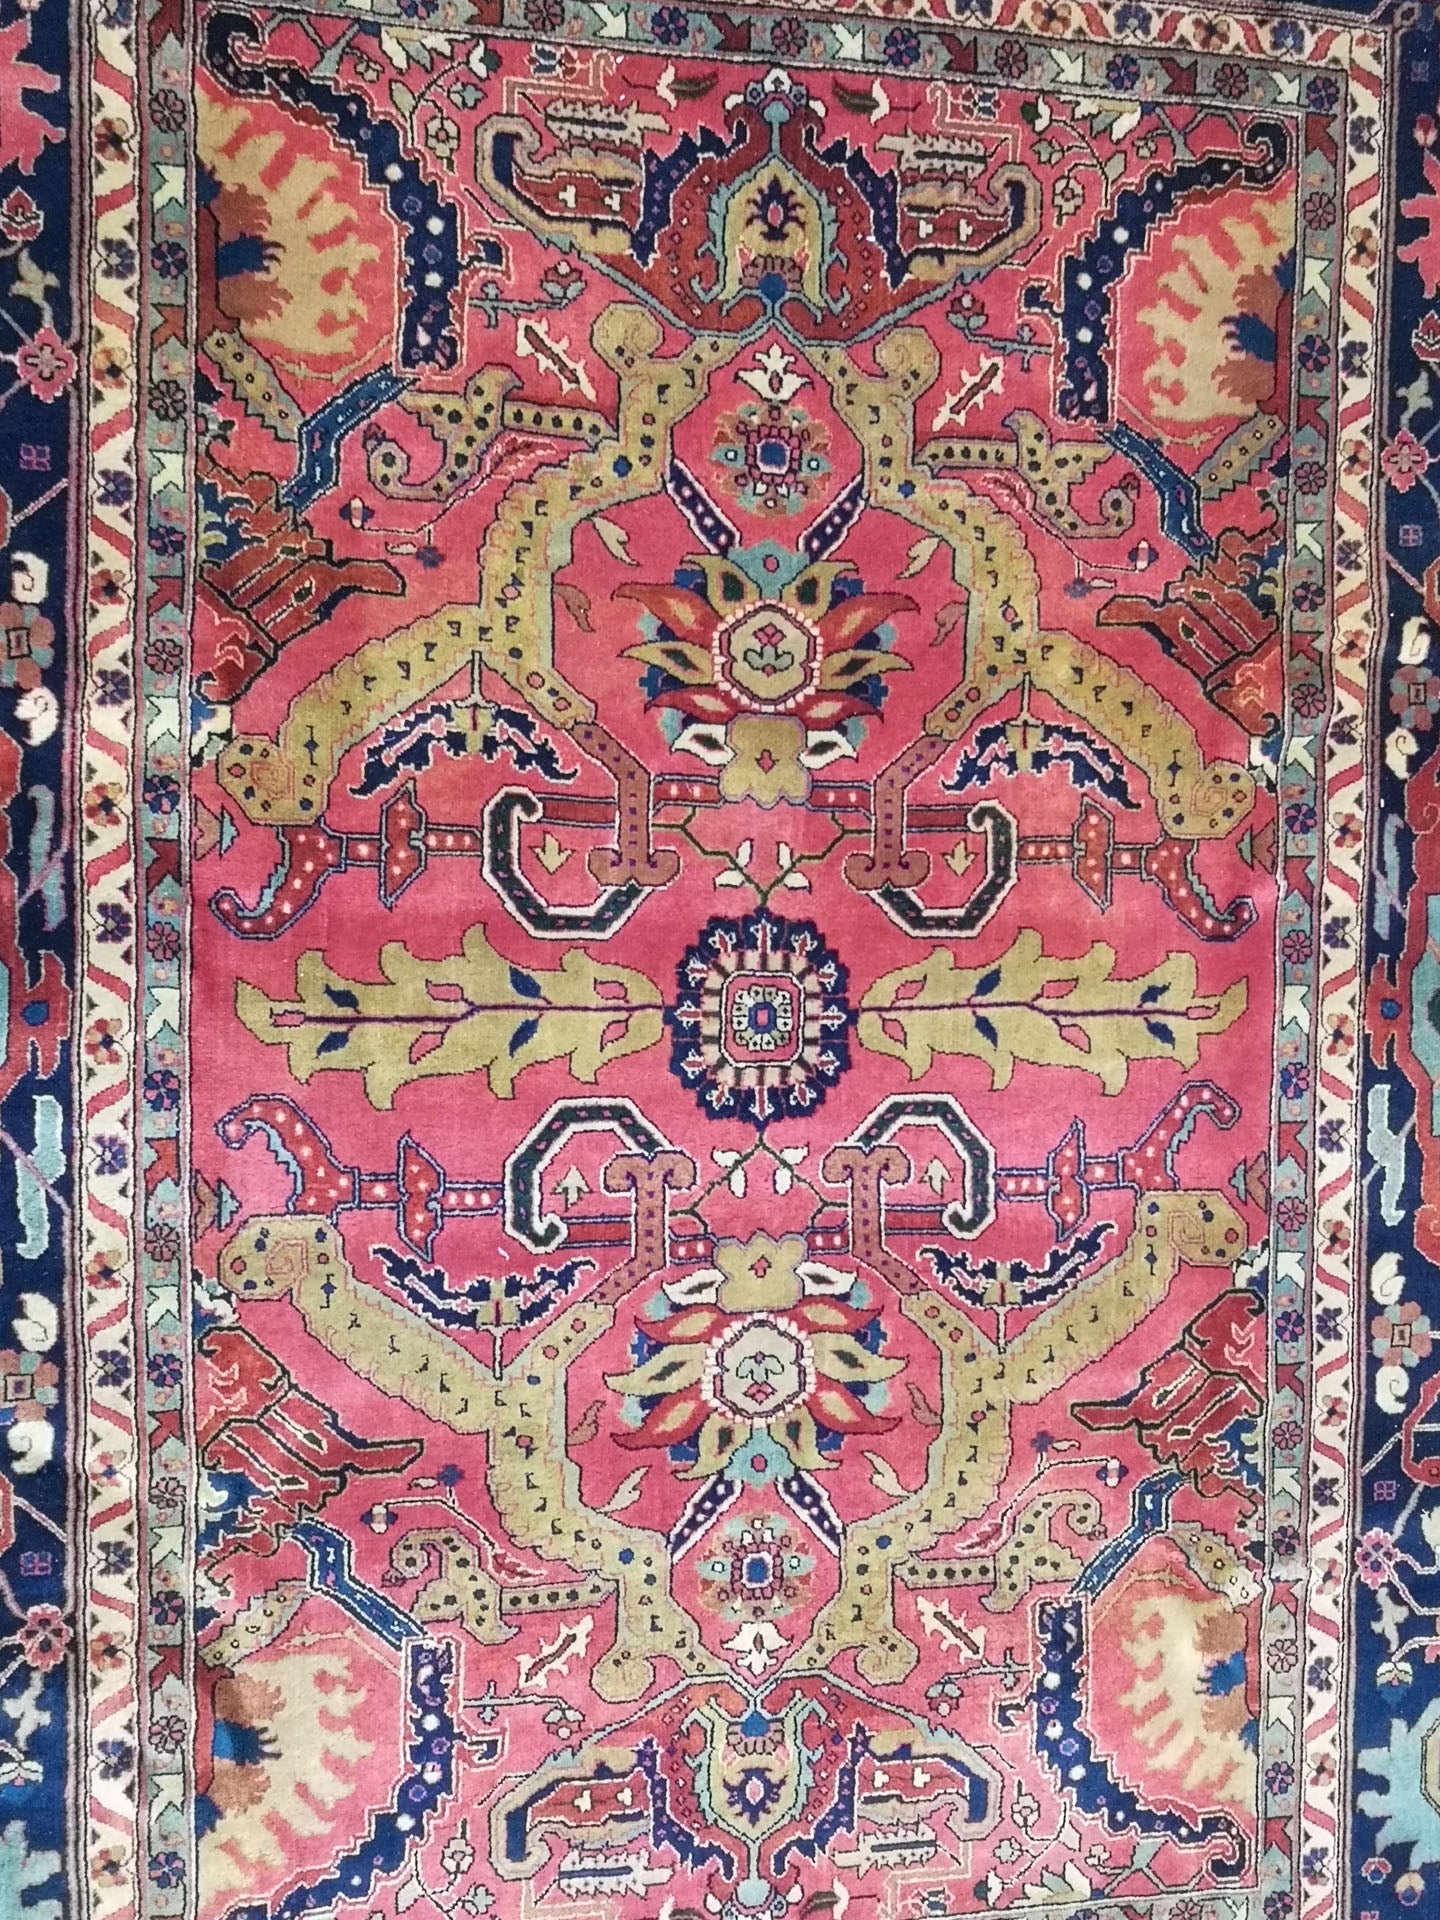 Indian SultanAbad Rug